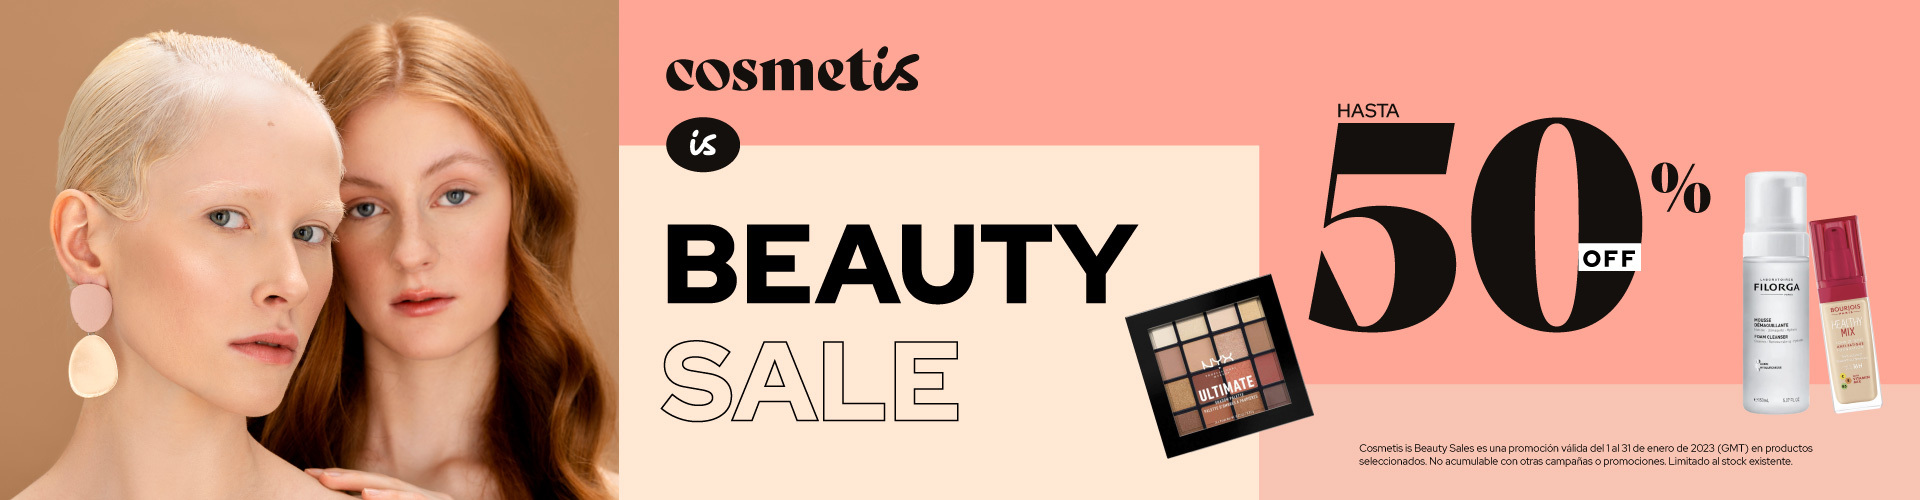 Cosmetis is Beauty Sales